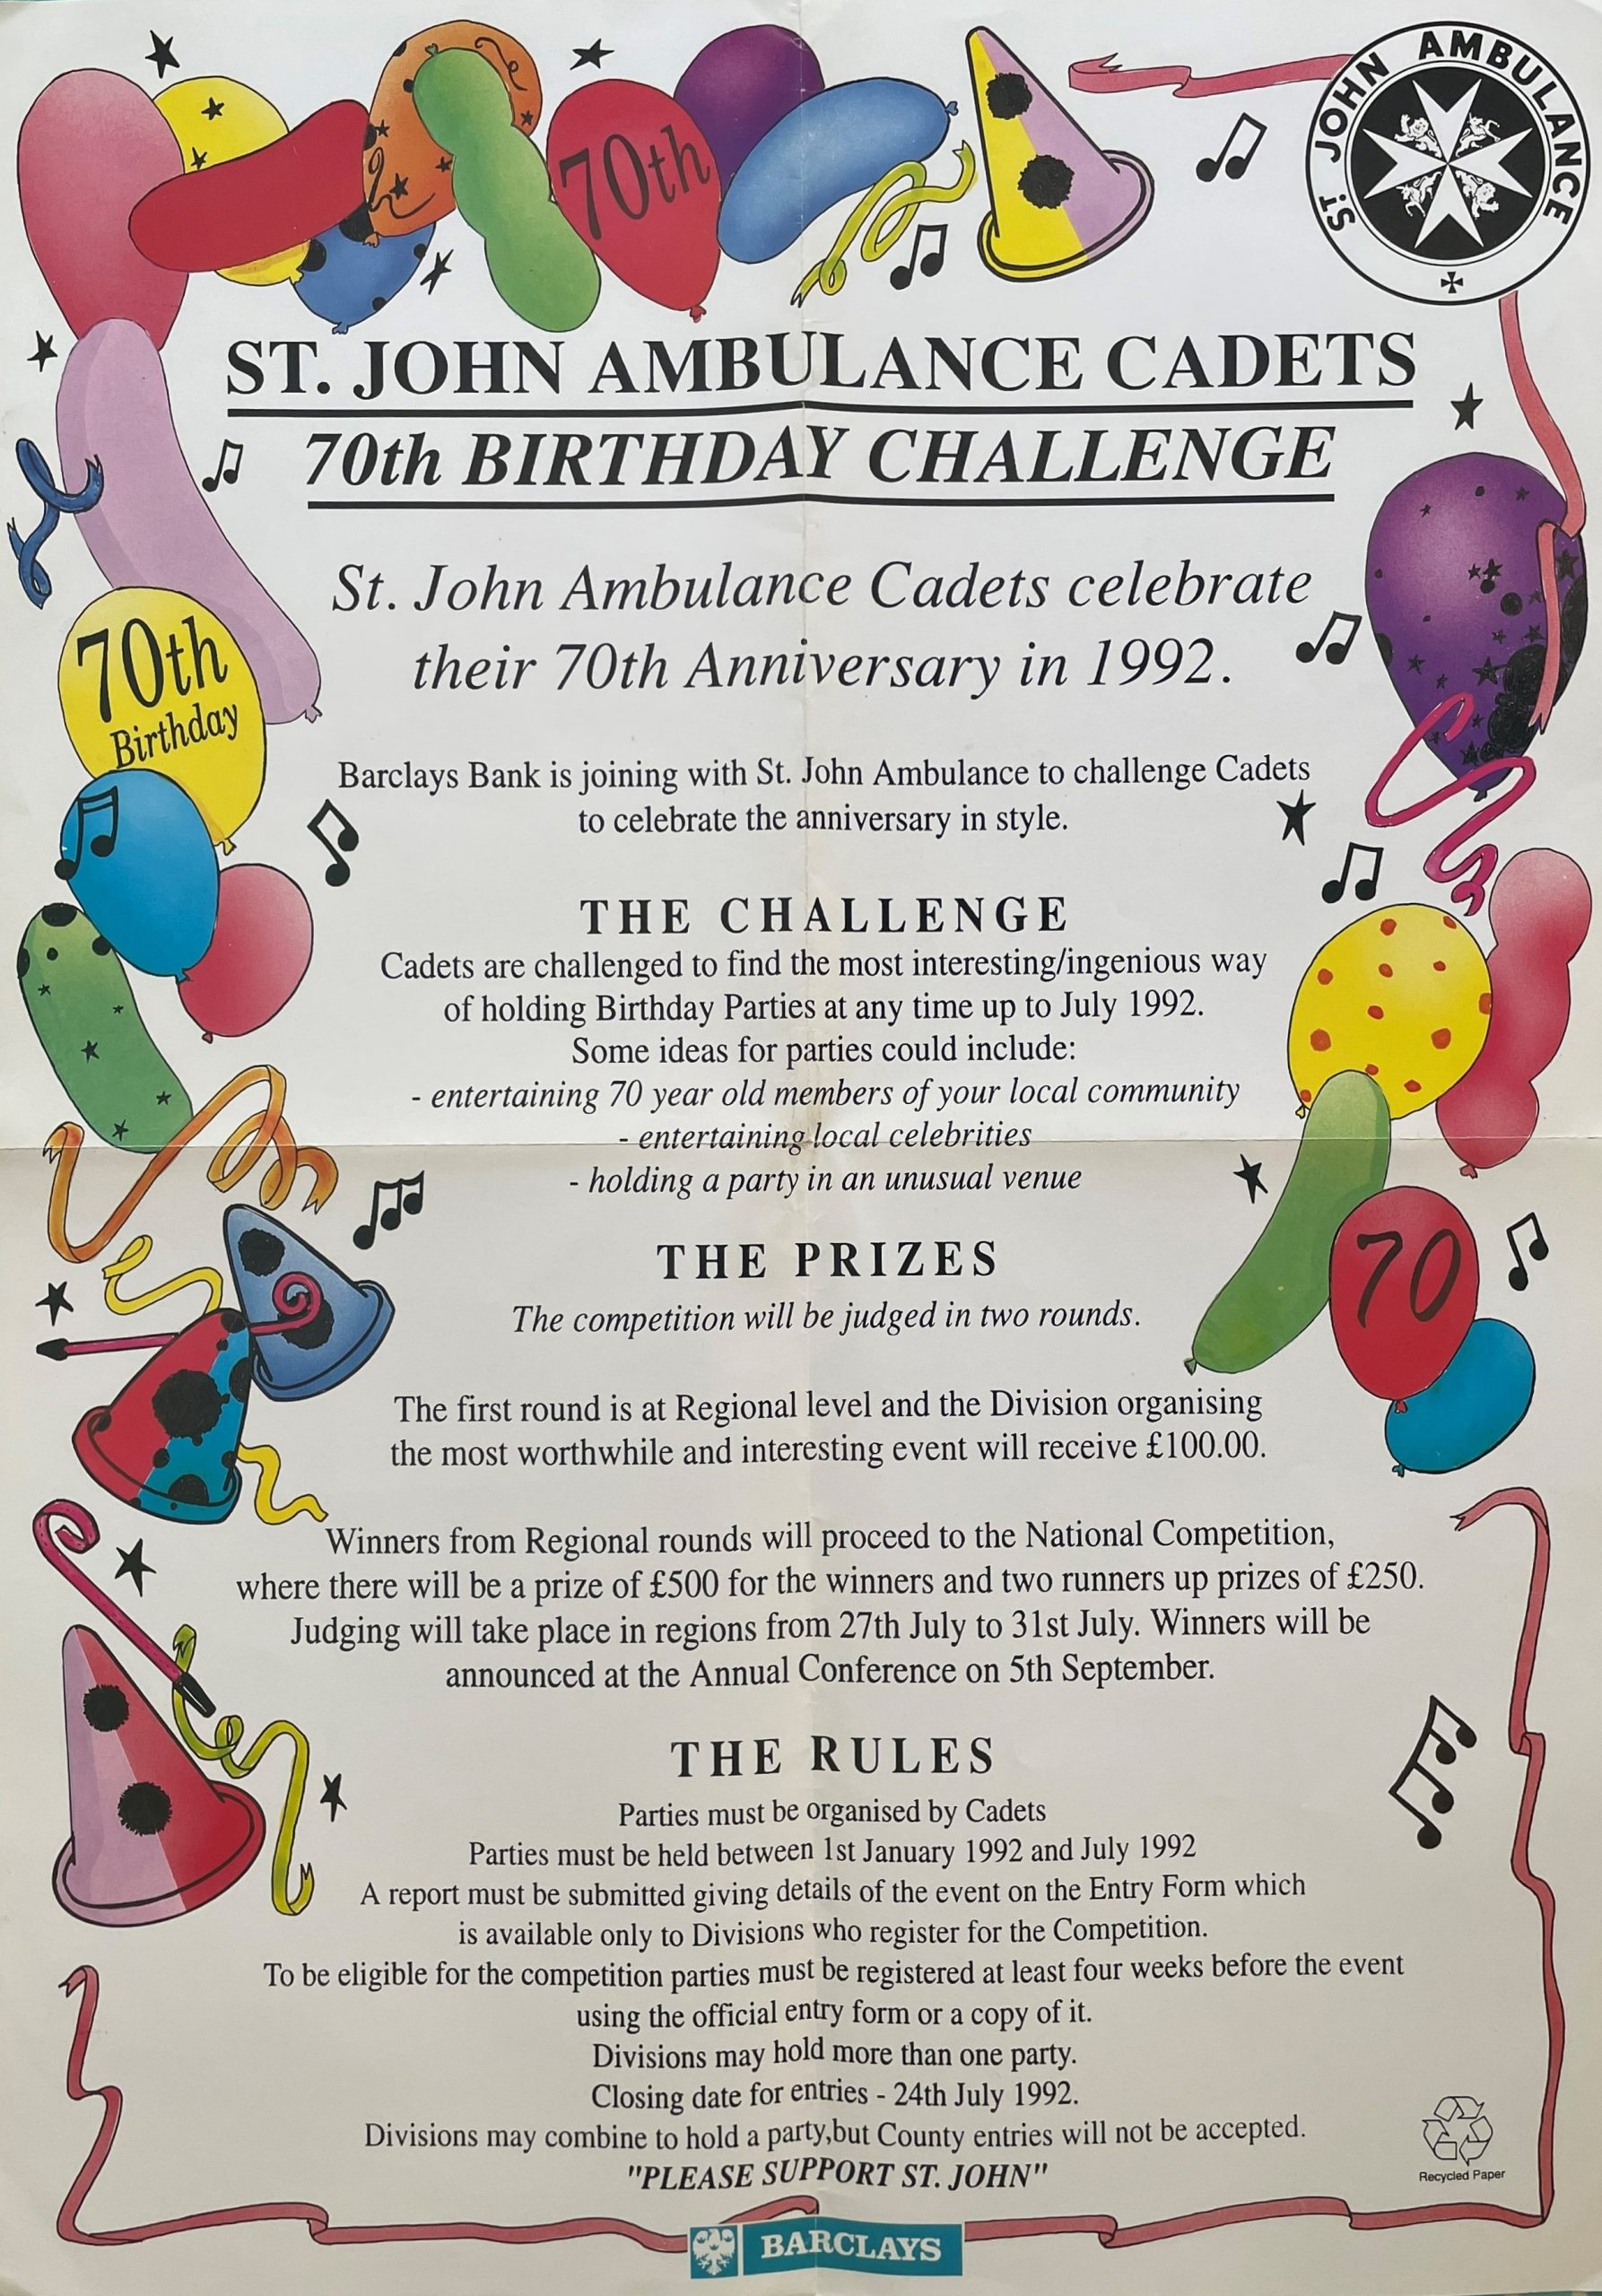 Colour photograph of a poster advertising the St John Ambulance Cadet 70th birthday challenge. The poster is illustrated with brightly coloured balloons, party hats and streamers on a white background. Text describes how to enter the challenge.